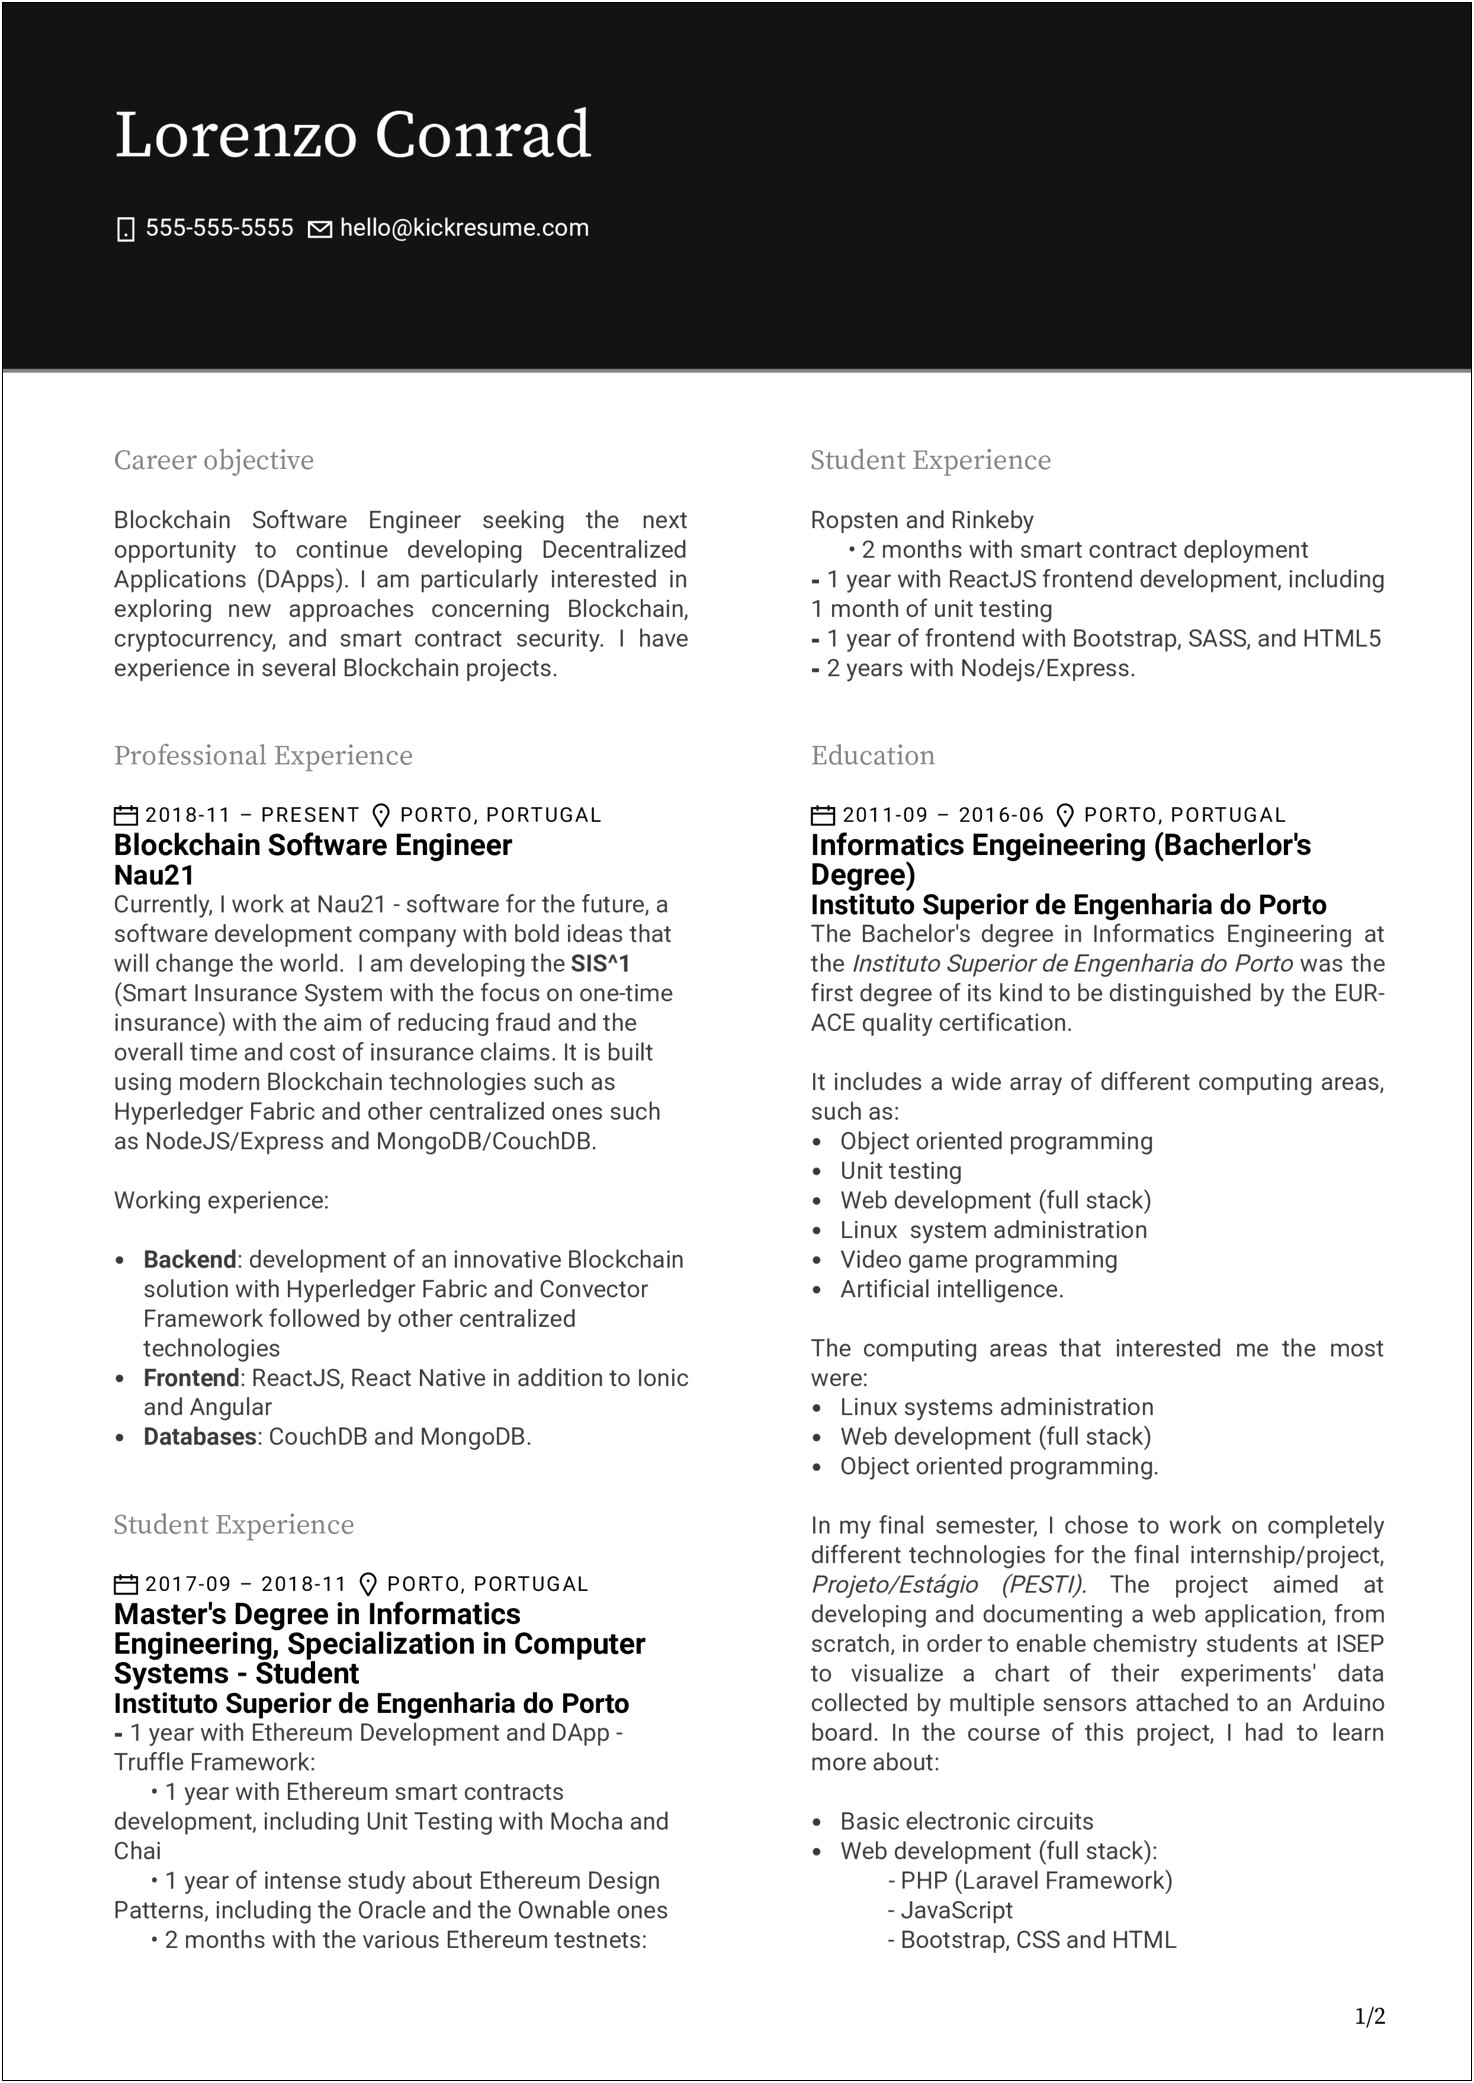 Resume Objective Statement Examples For Engineering